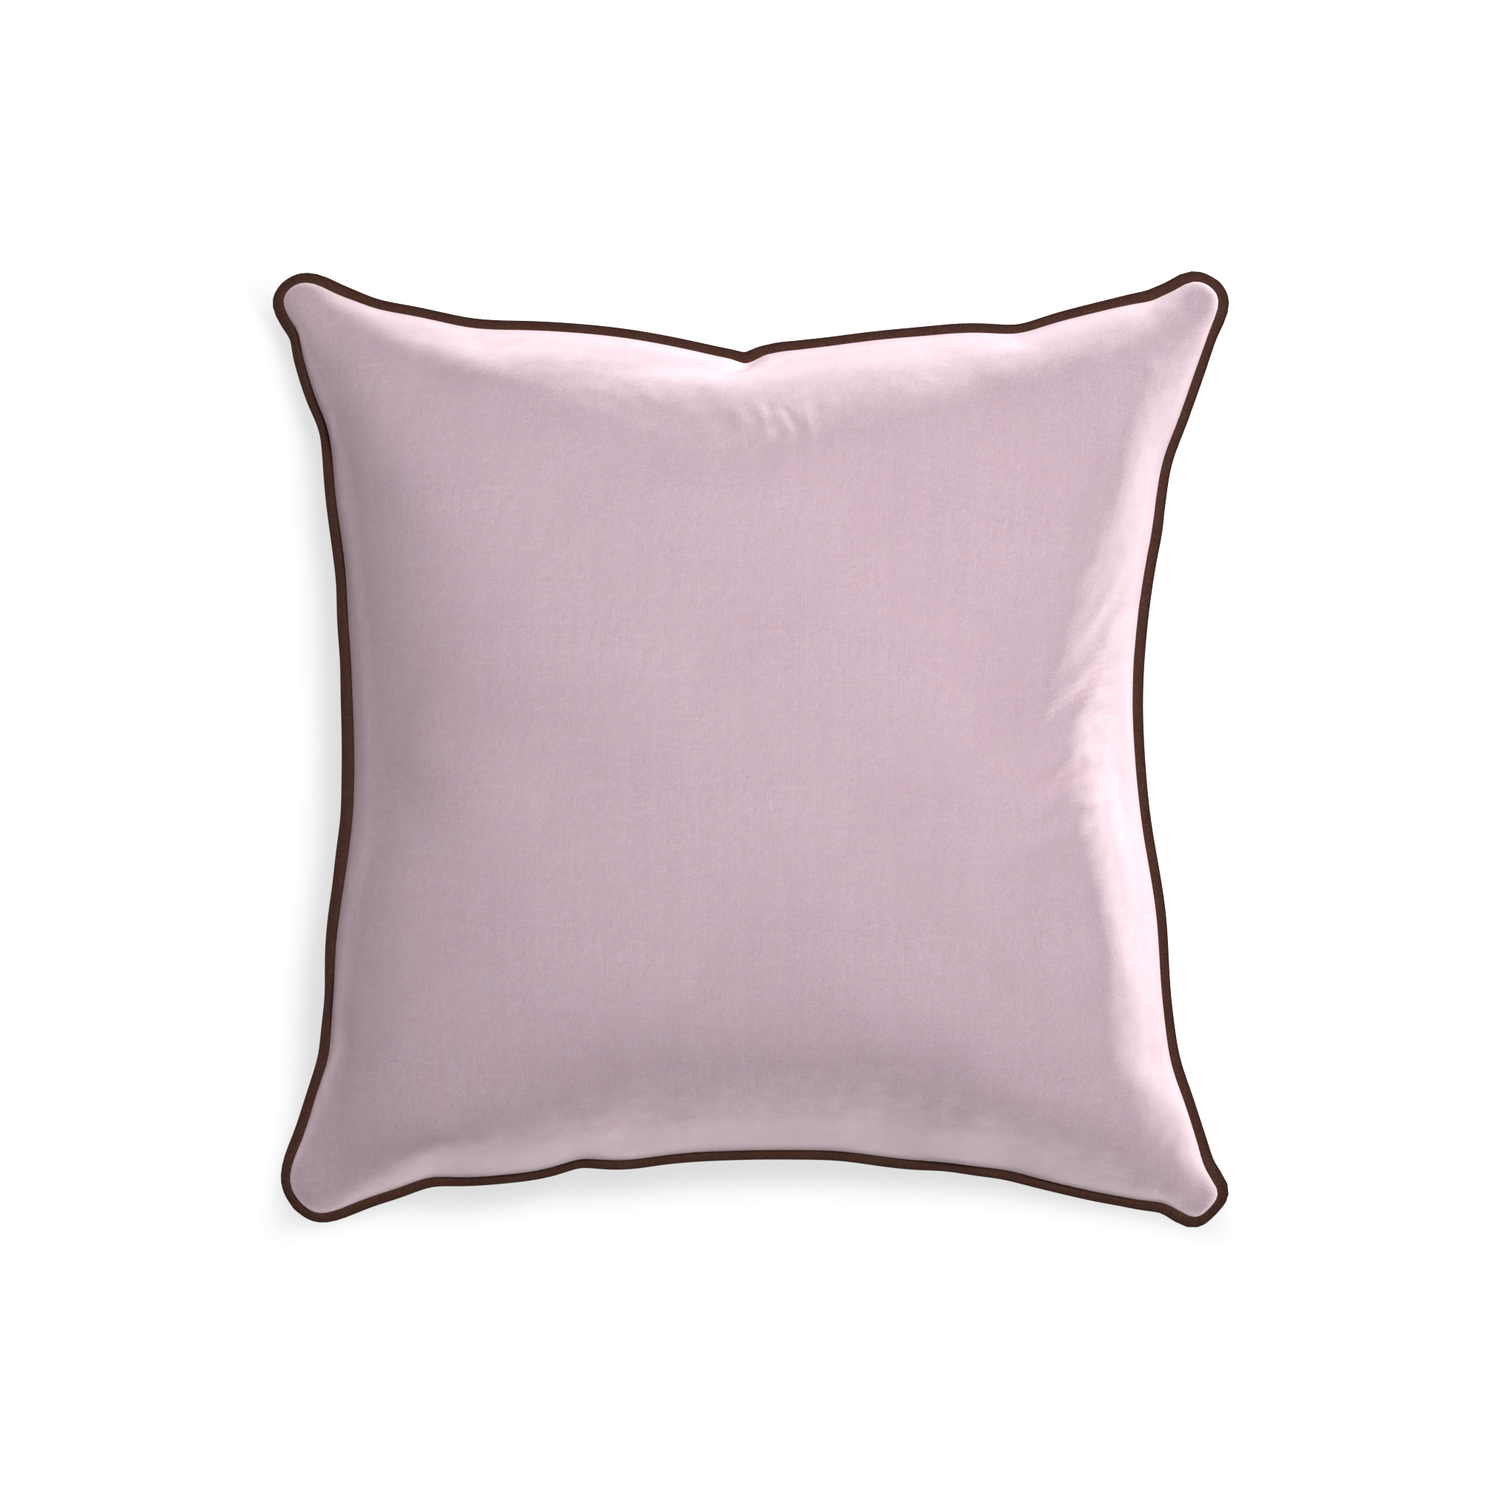 20-square lilac velvet custom pillow with w piping on white background